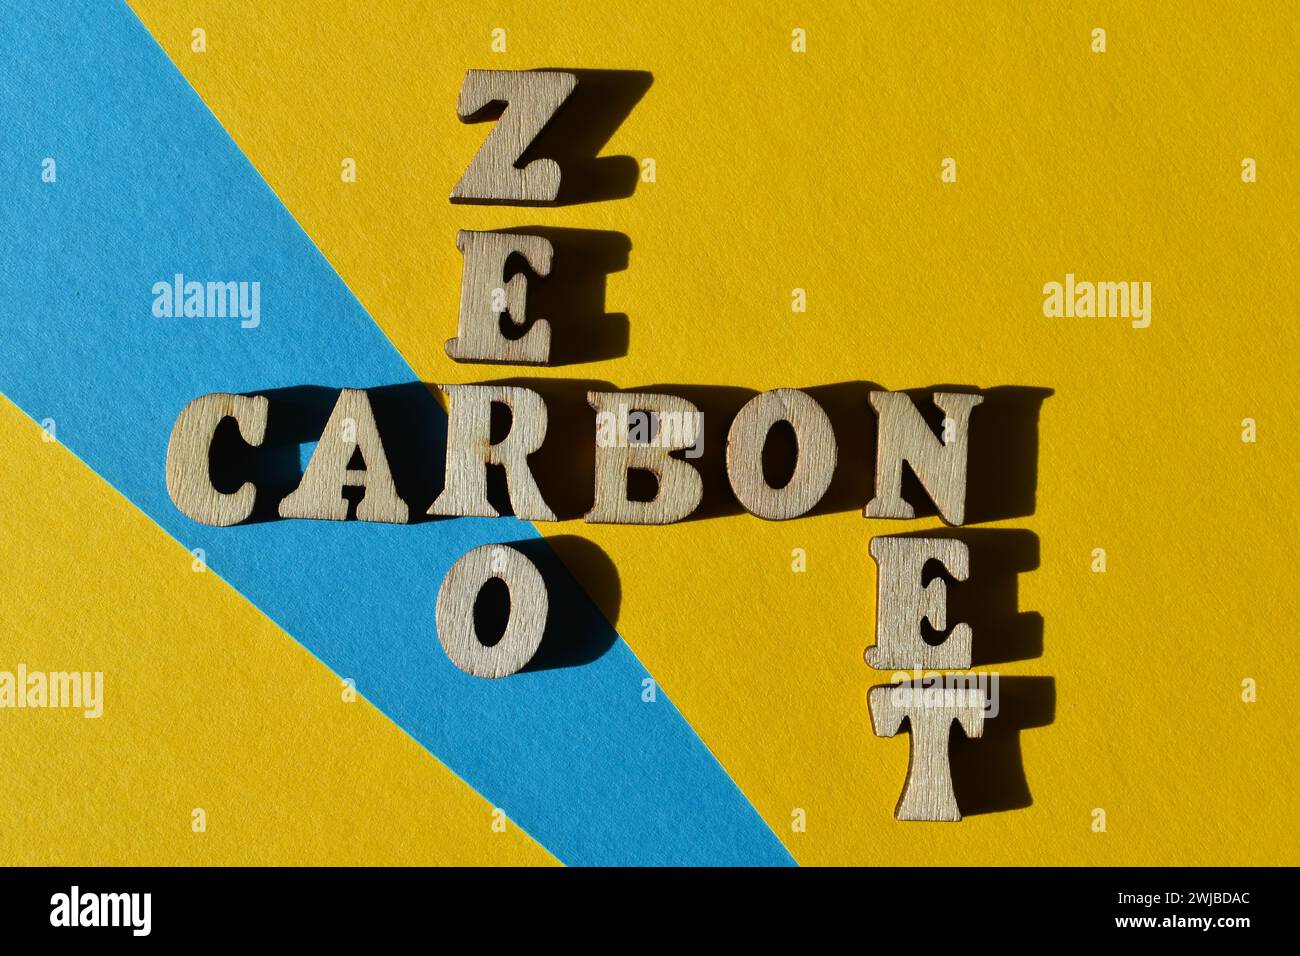 Net Zero Carbon, words in wooden alphabet letters in crossword form isolated on background as banner headline Stock Photo